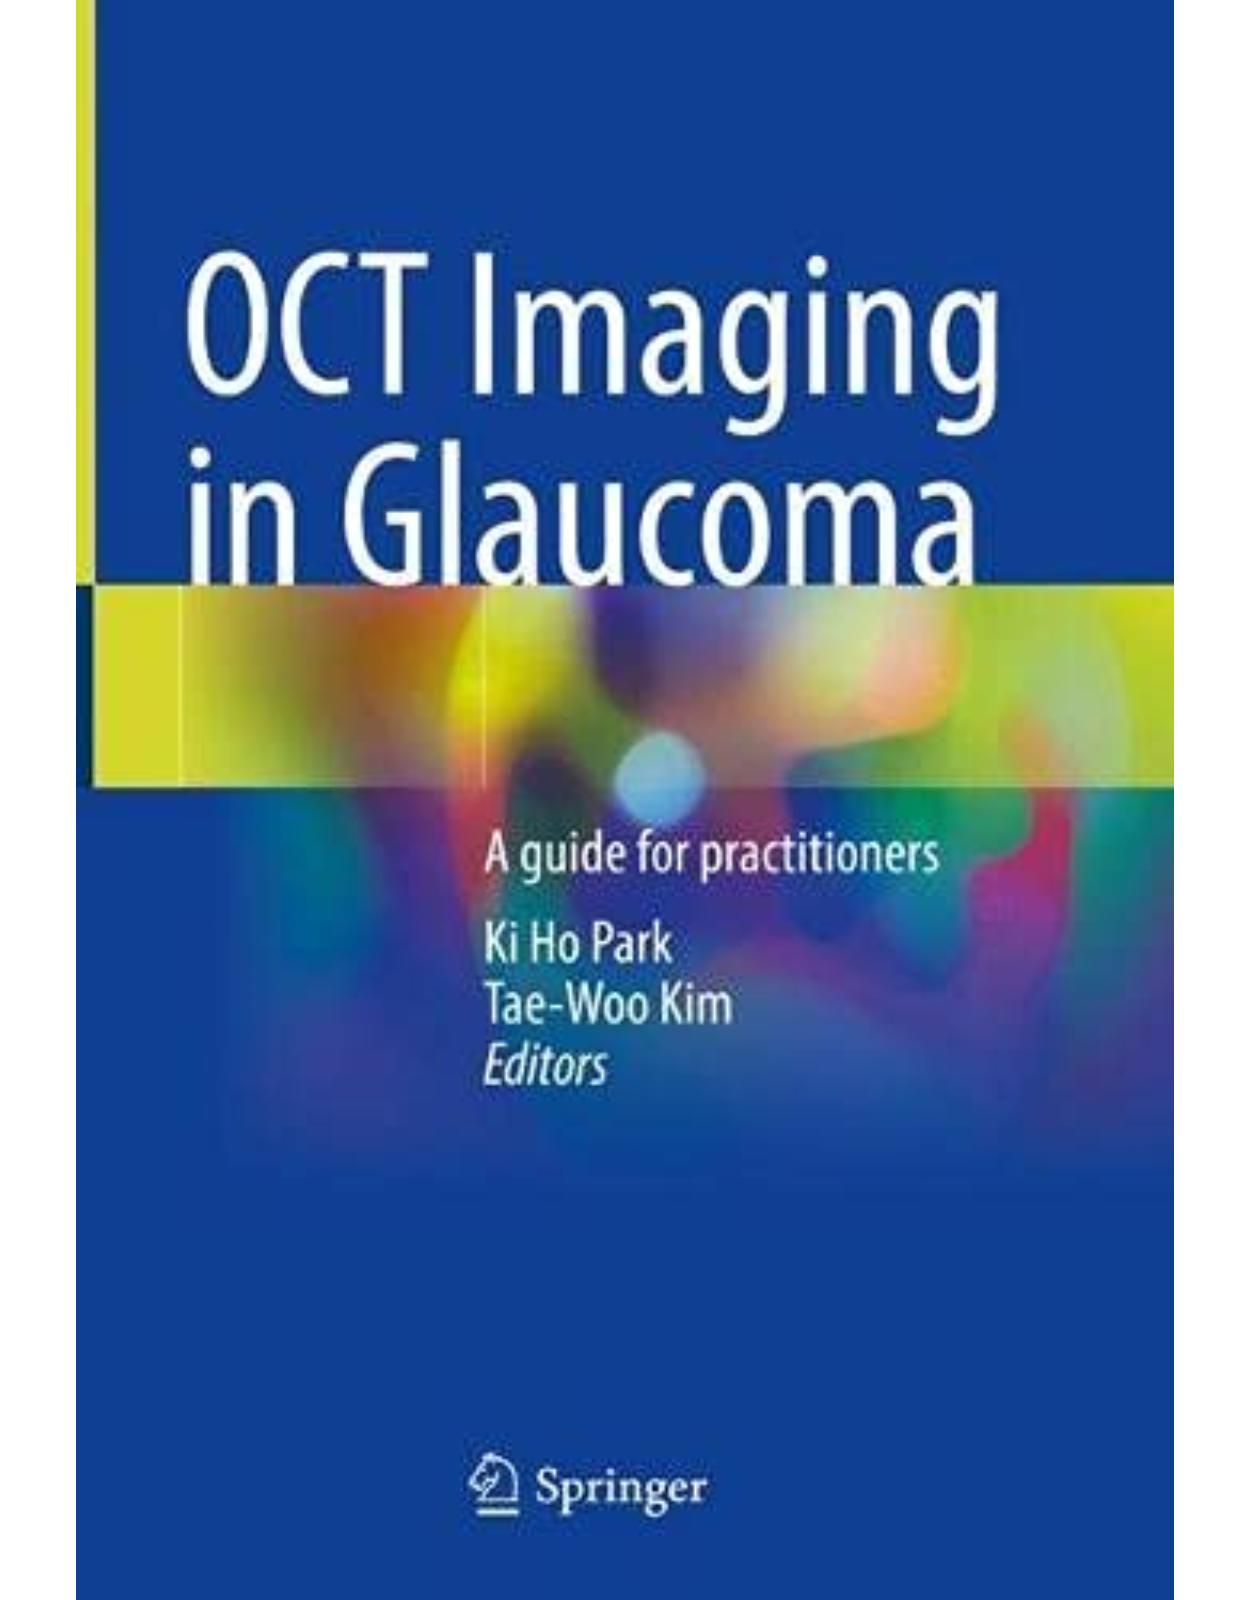 OCT Imaging in Glaucoma: A guide for practitioners